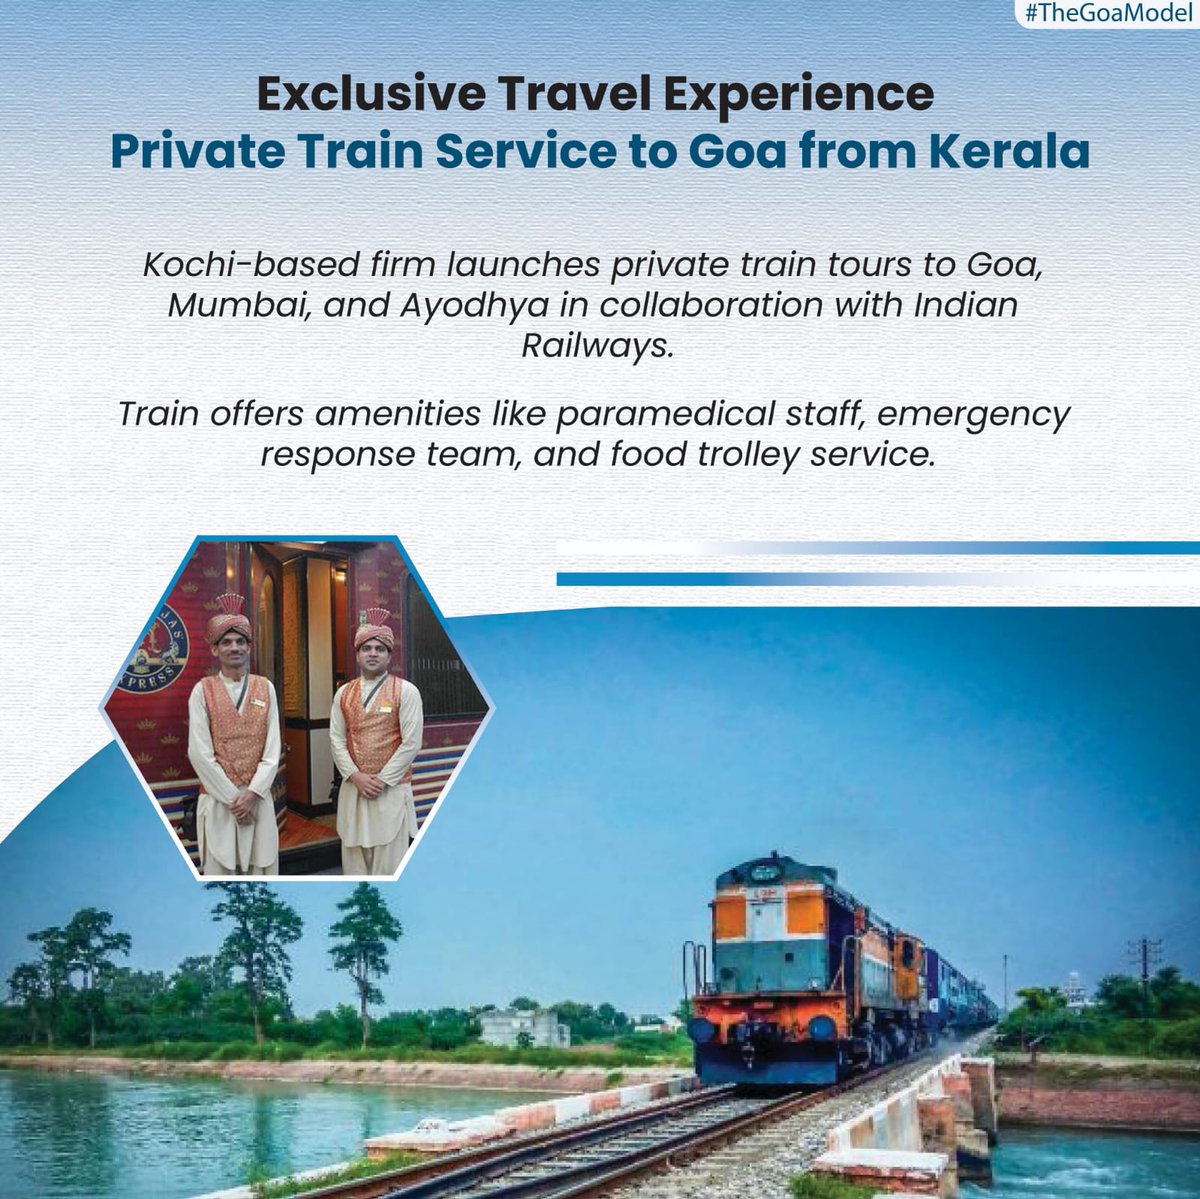 A new private train service is launching from Kerala to Goa, Mumbai, and Ayodhya, offering a unique travel experience with top-notch amenities. #TheGoaModel #GoaTravel #IndianRailways
#PrivateTrain #KeralaToGoa #KeralaToMumbai #KeralaToAyodhya #TravelConvenience #LuxuryTravel